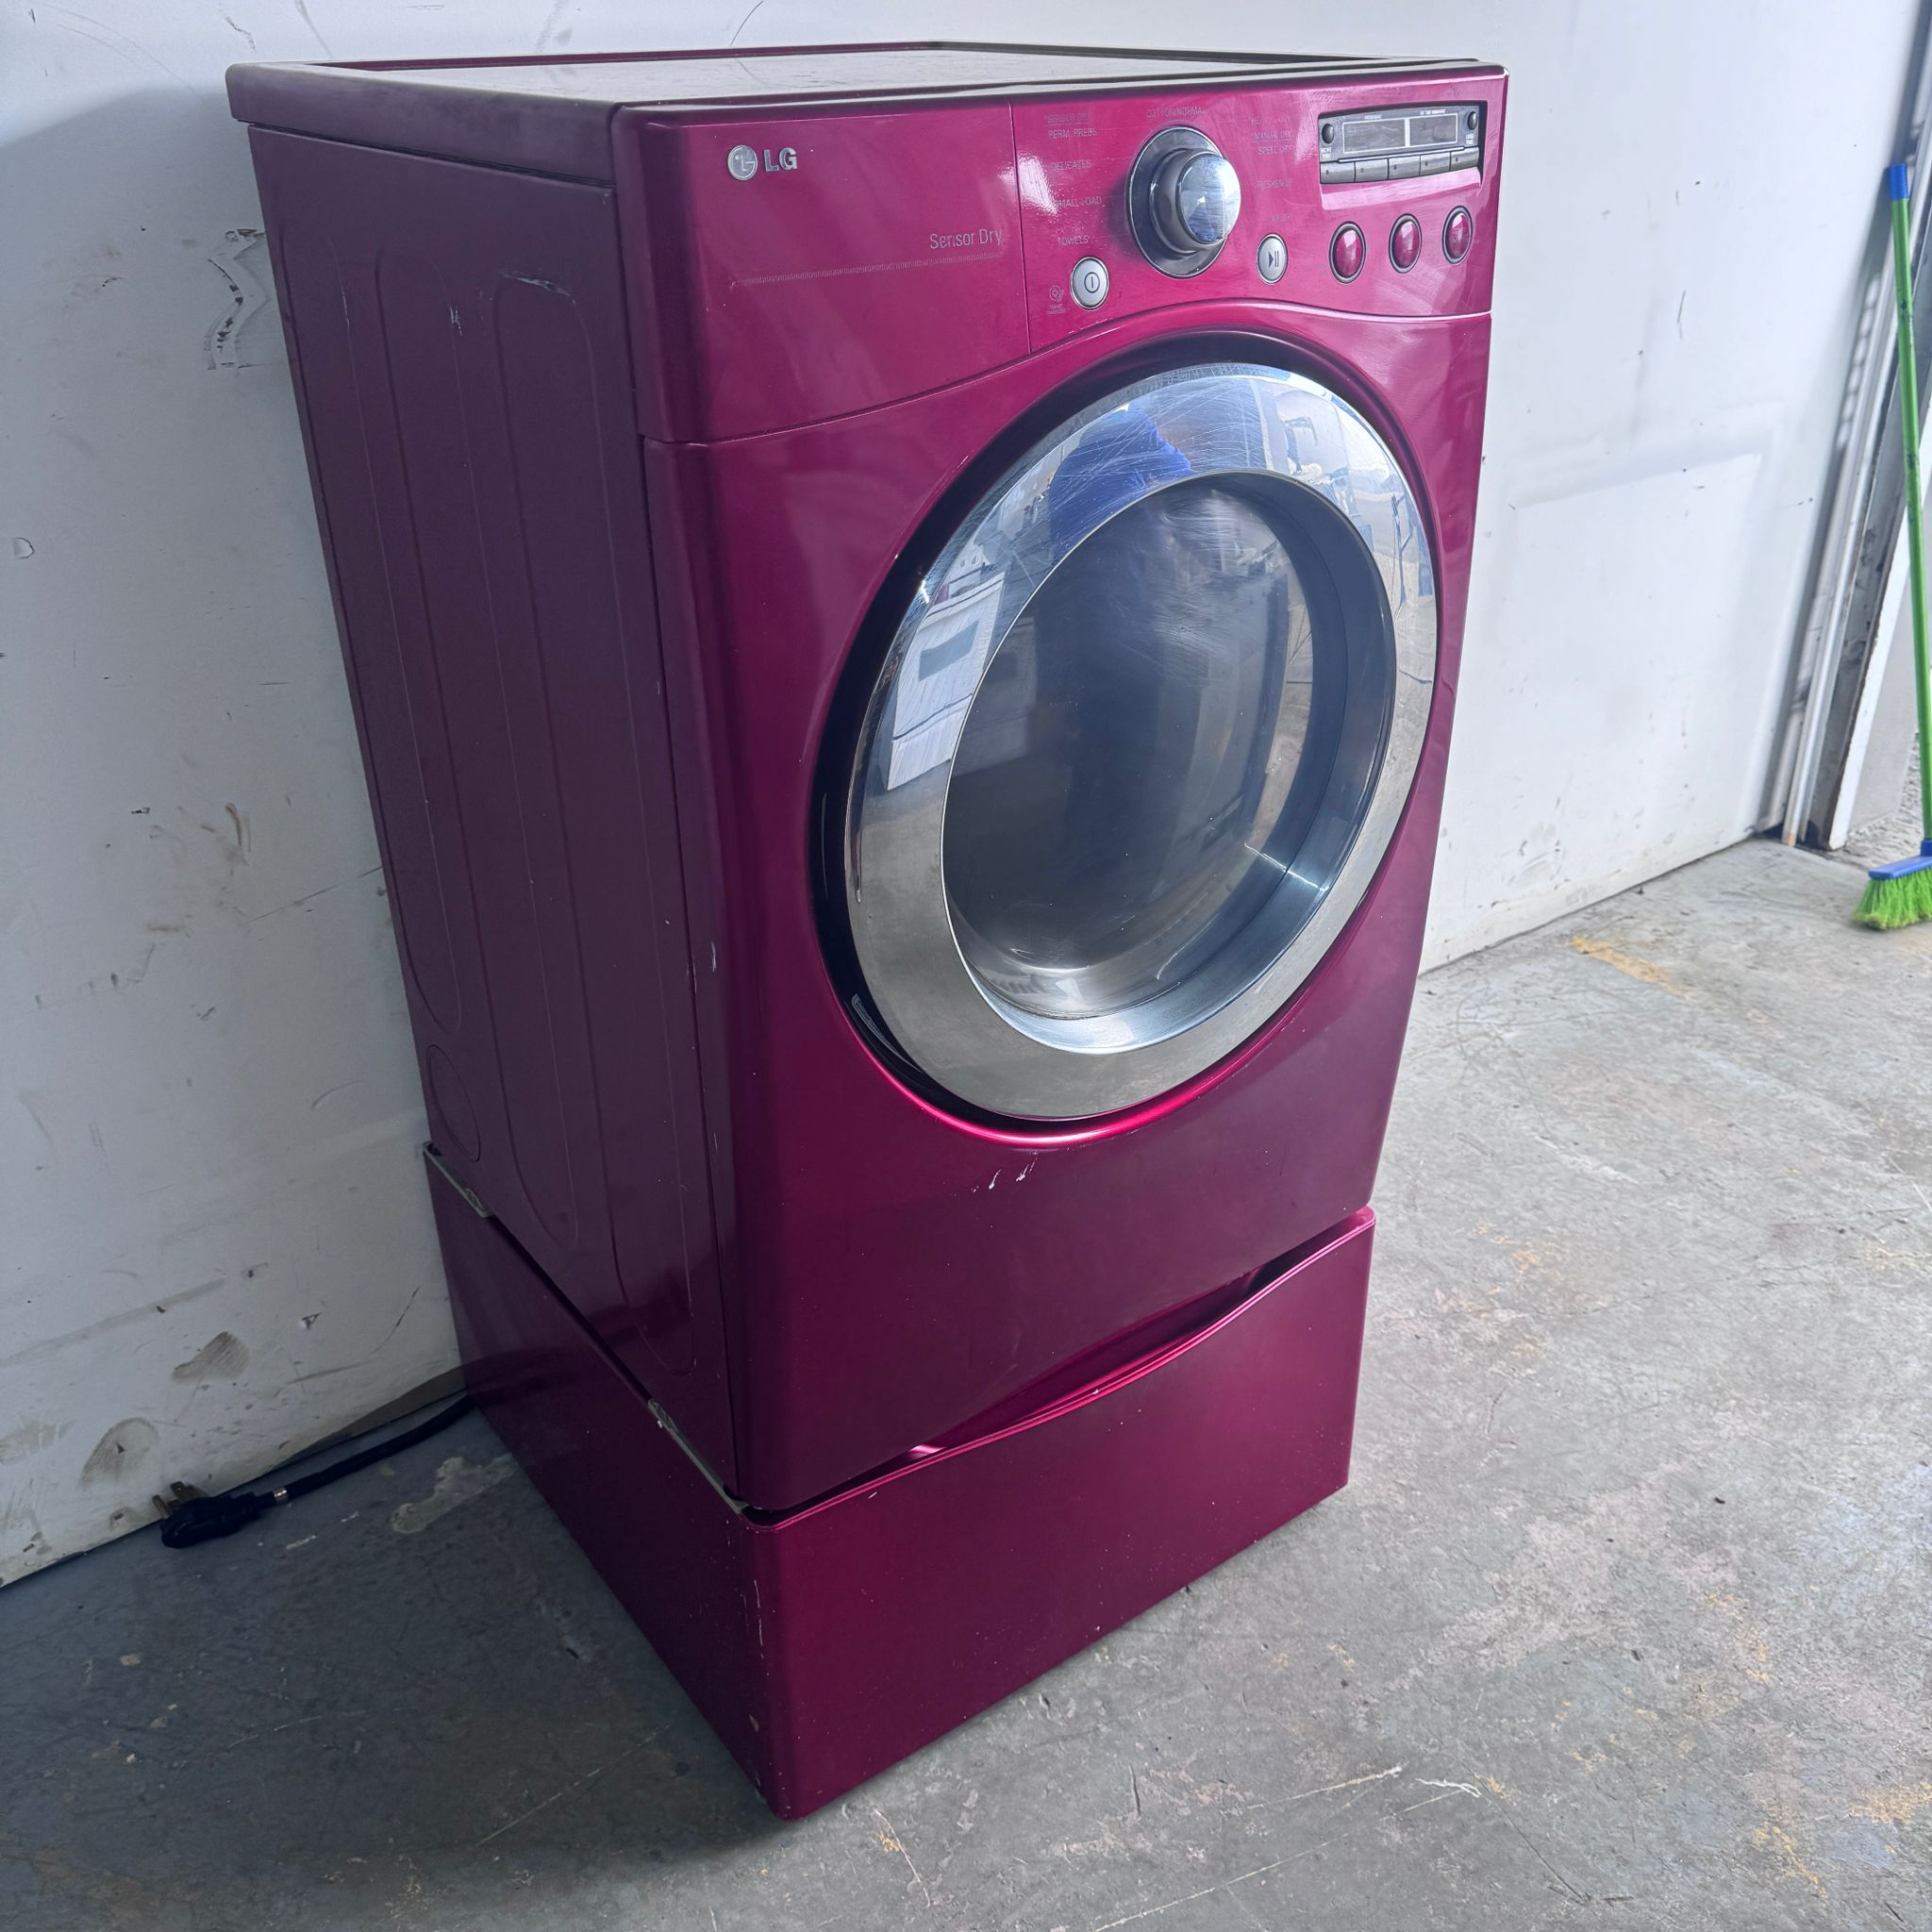 LG Dryer Front Load - Red with Pedestal